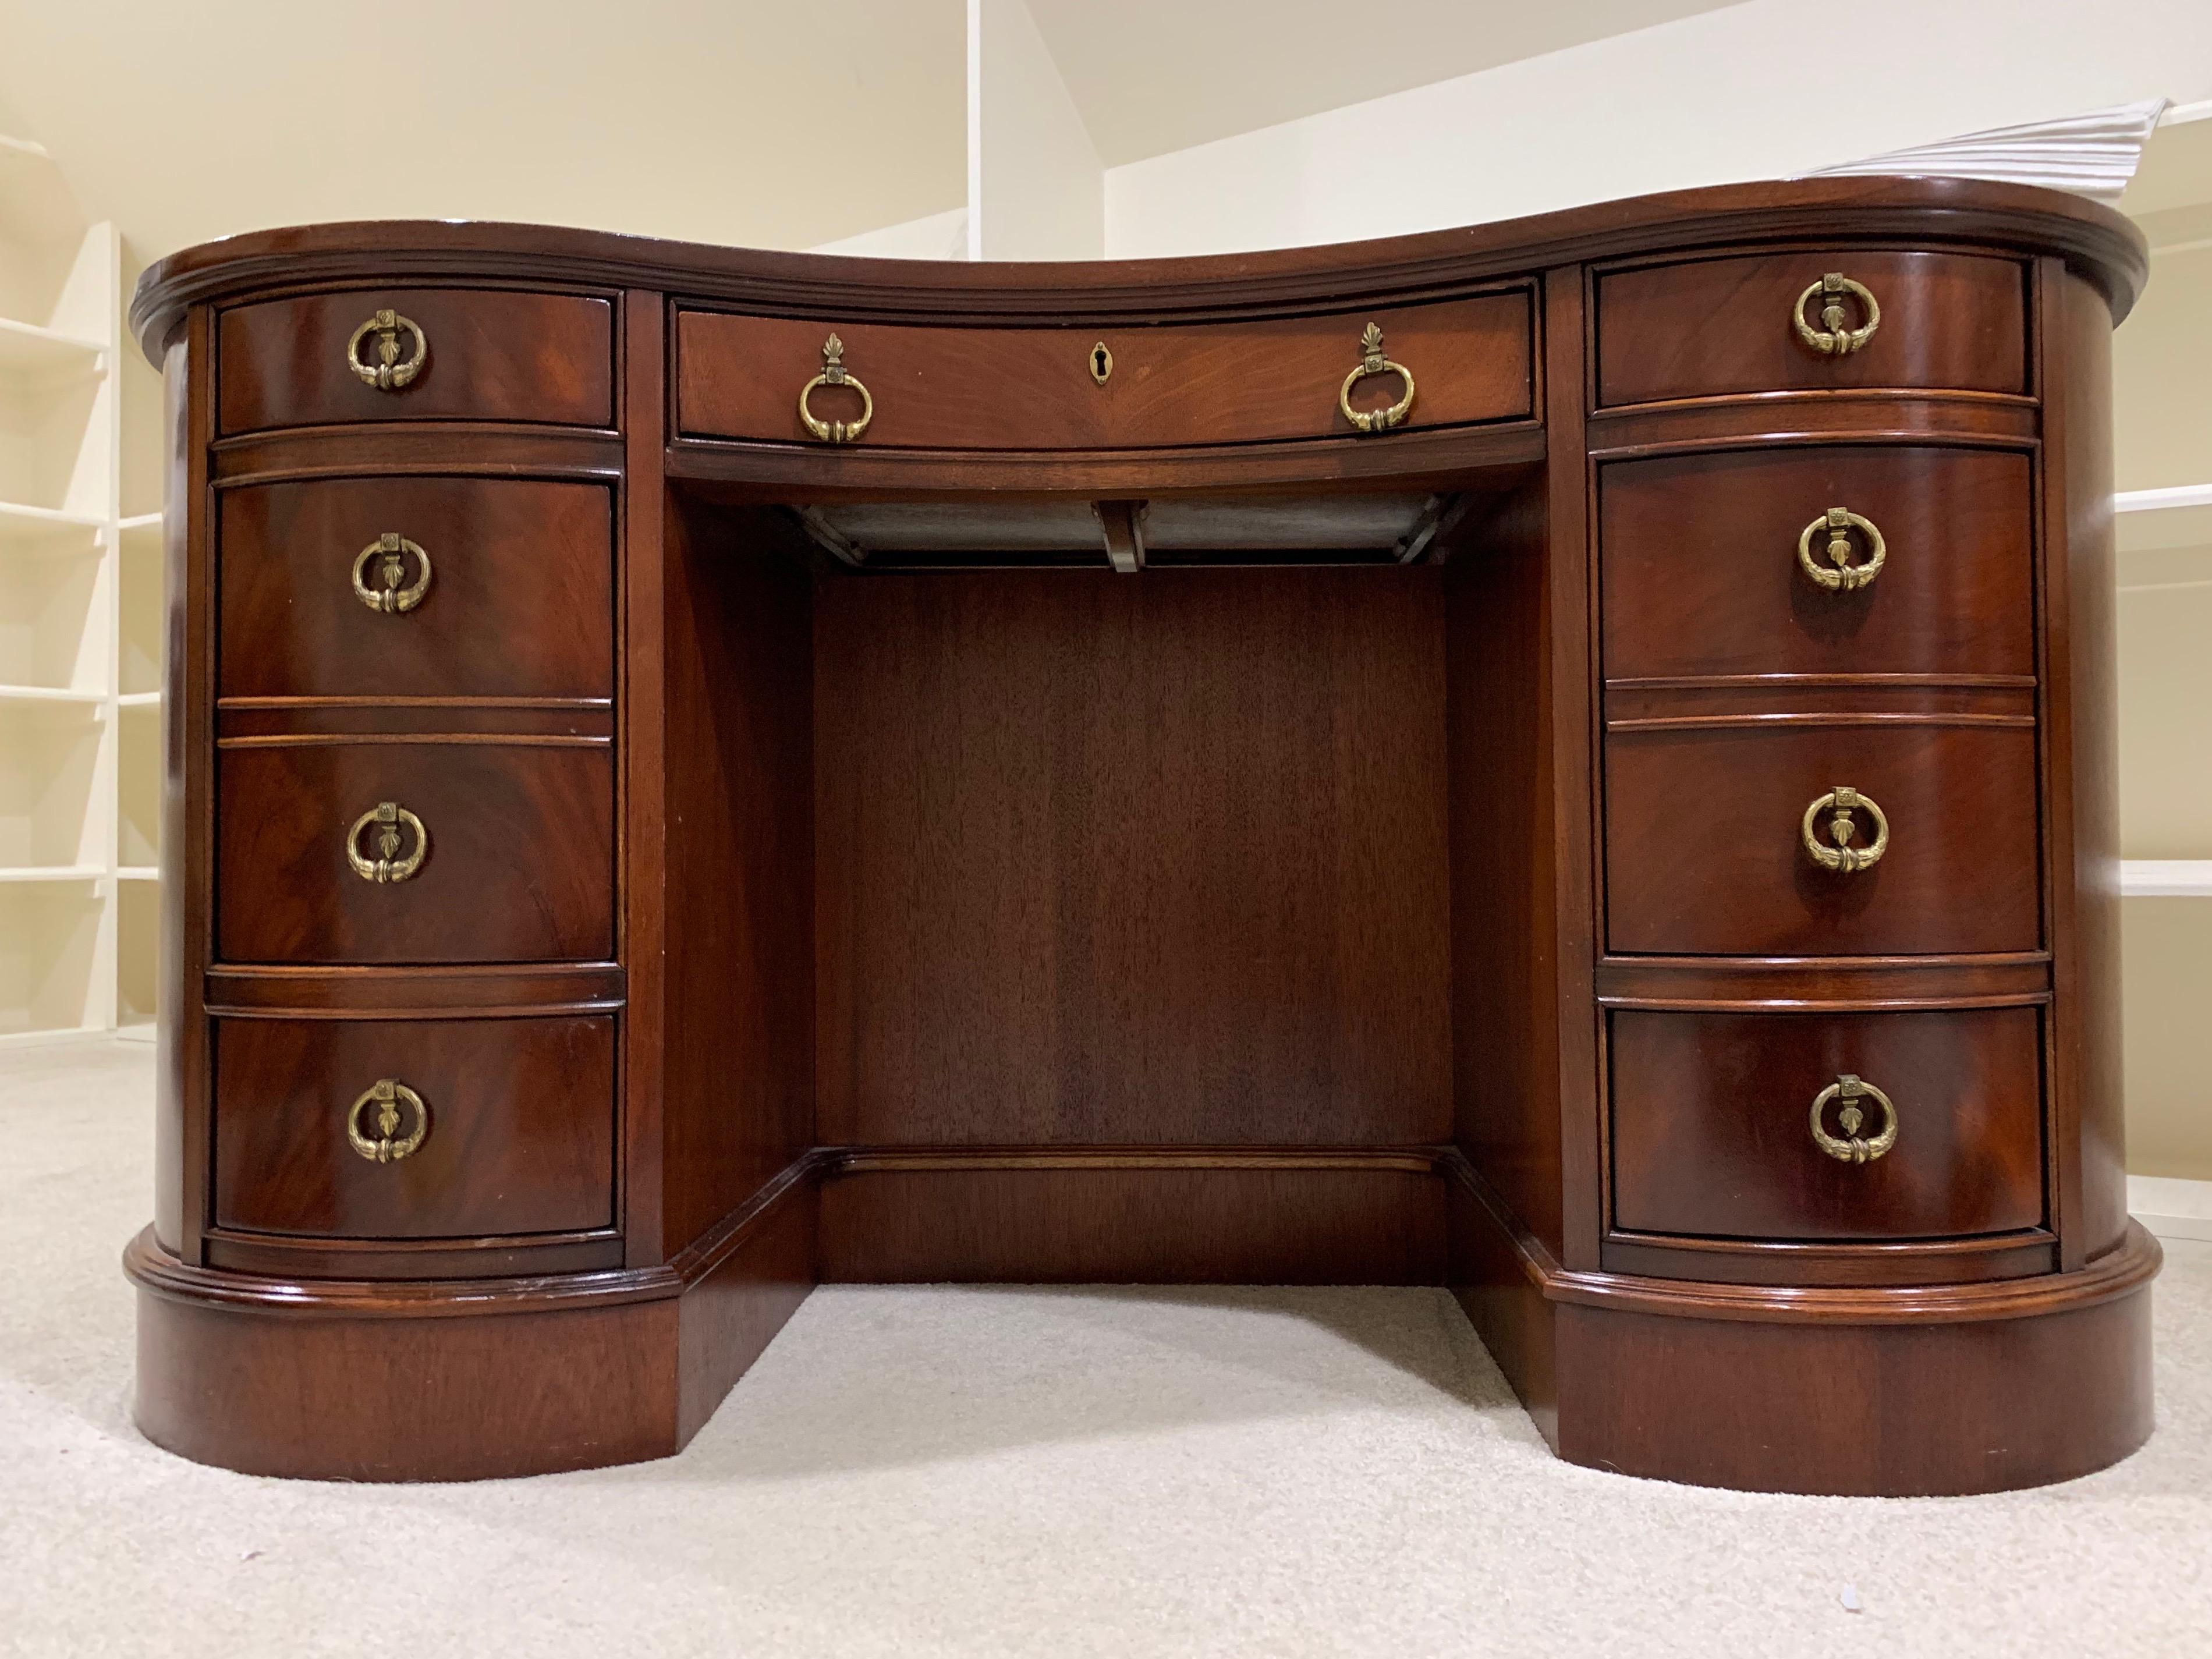 Gorgeous crescent shaped desk made by Baker Furniture. Lockable top drawer with original key. Leather top. Classic design. Priced to sell right away.